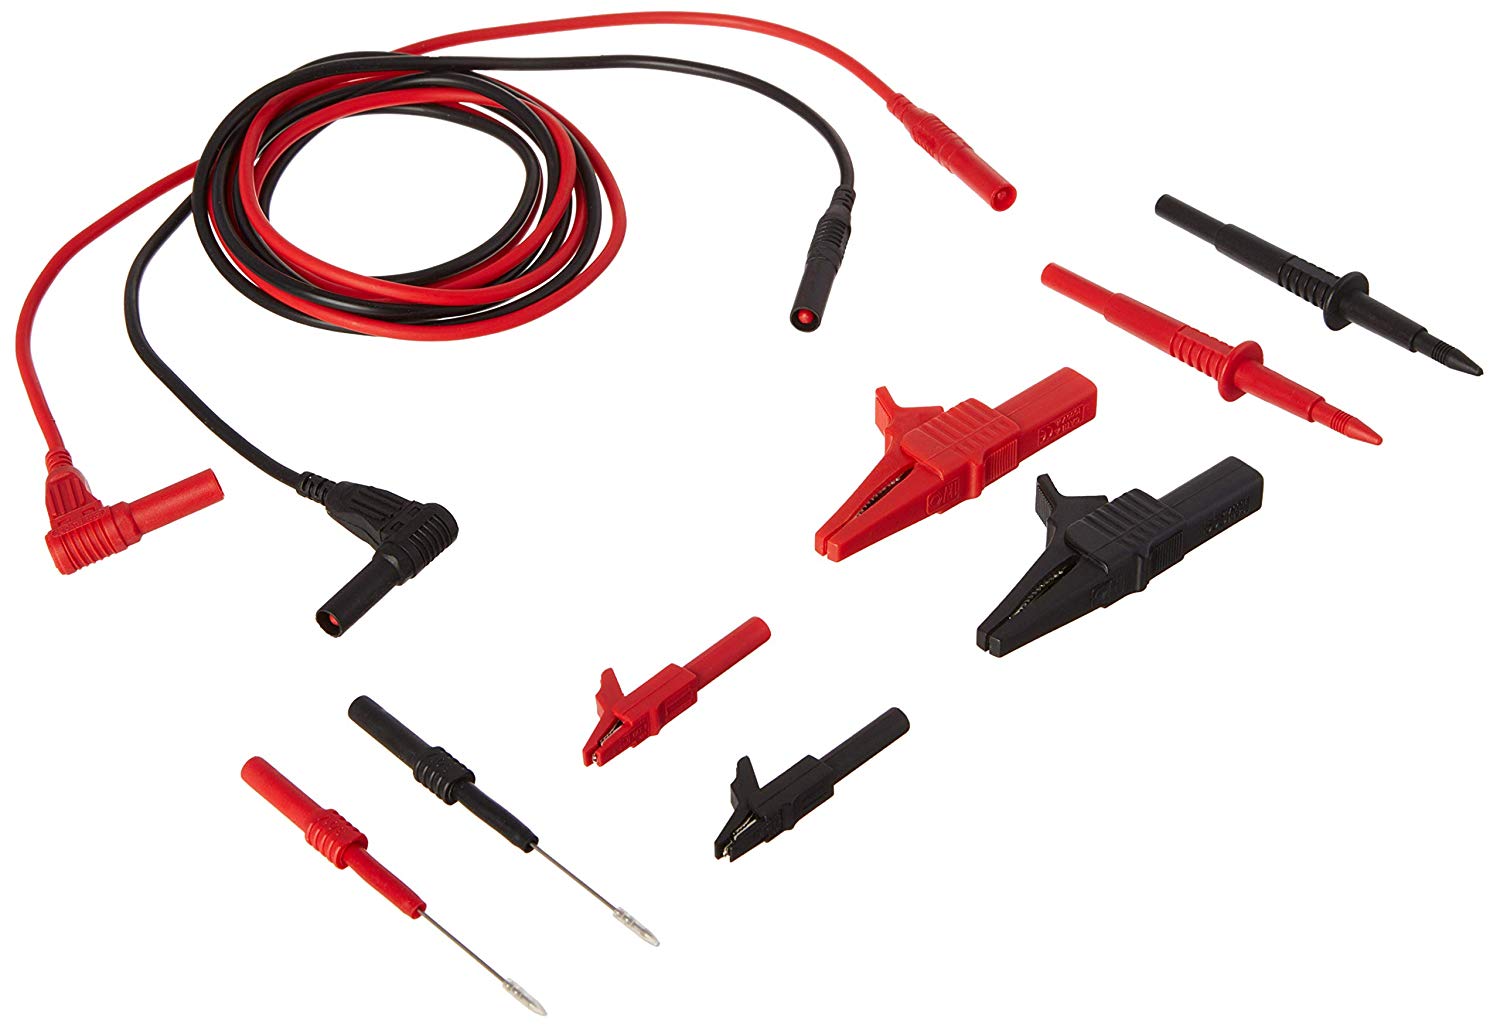 Electronic Specialties 143 Automotive Test Lead Kit - MPR Tools & Equipment